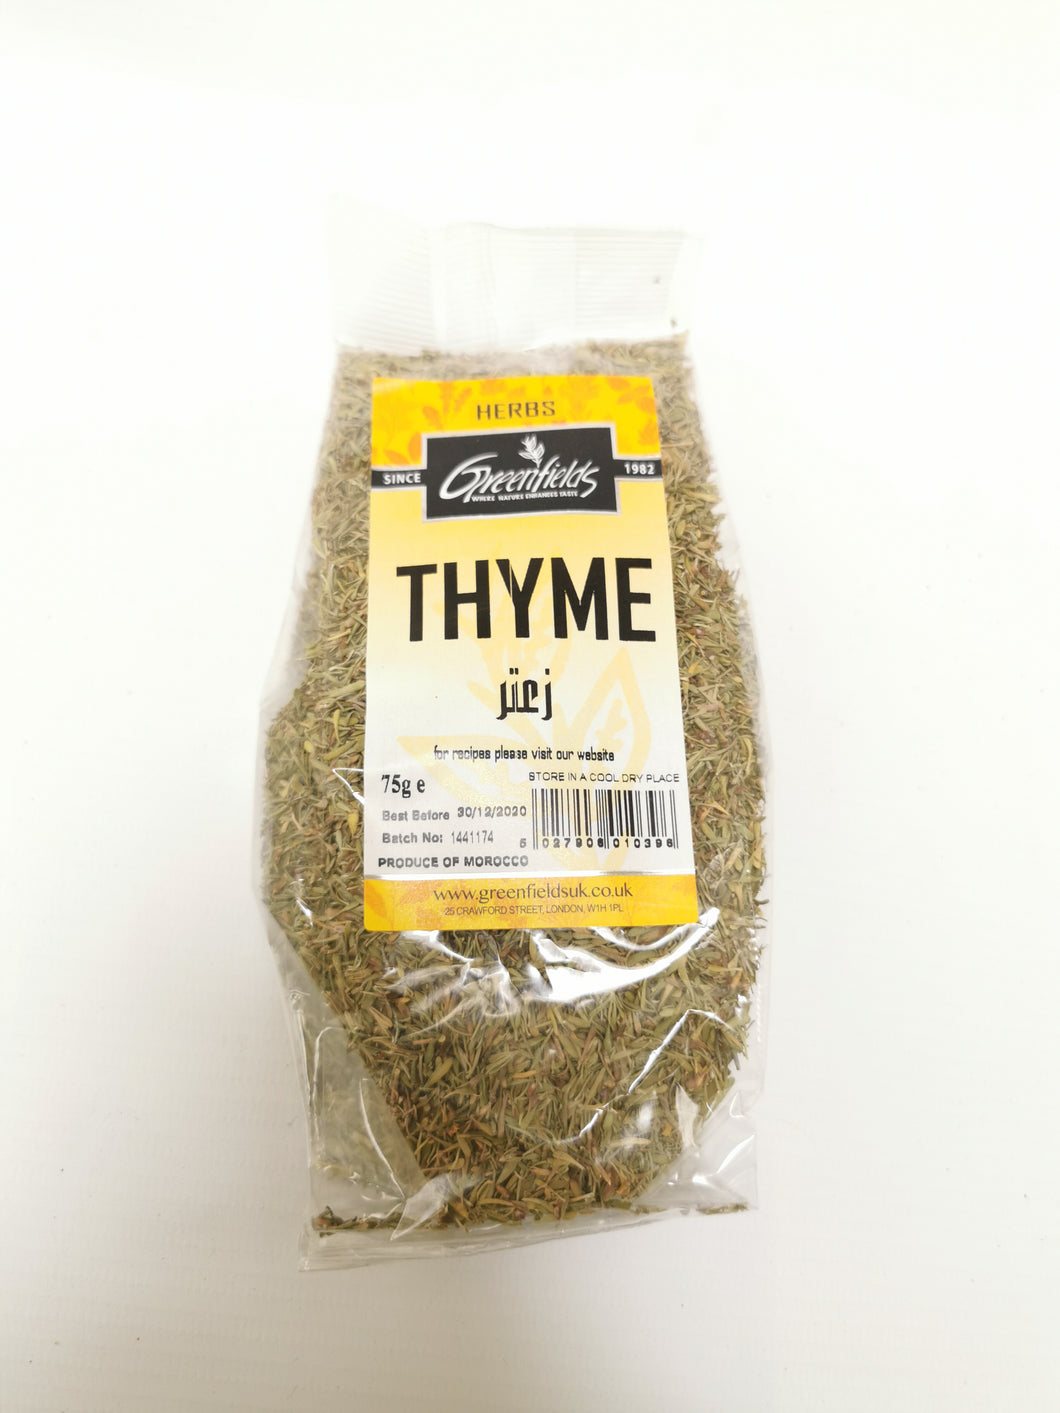 Greenfields Thyme